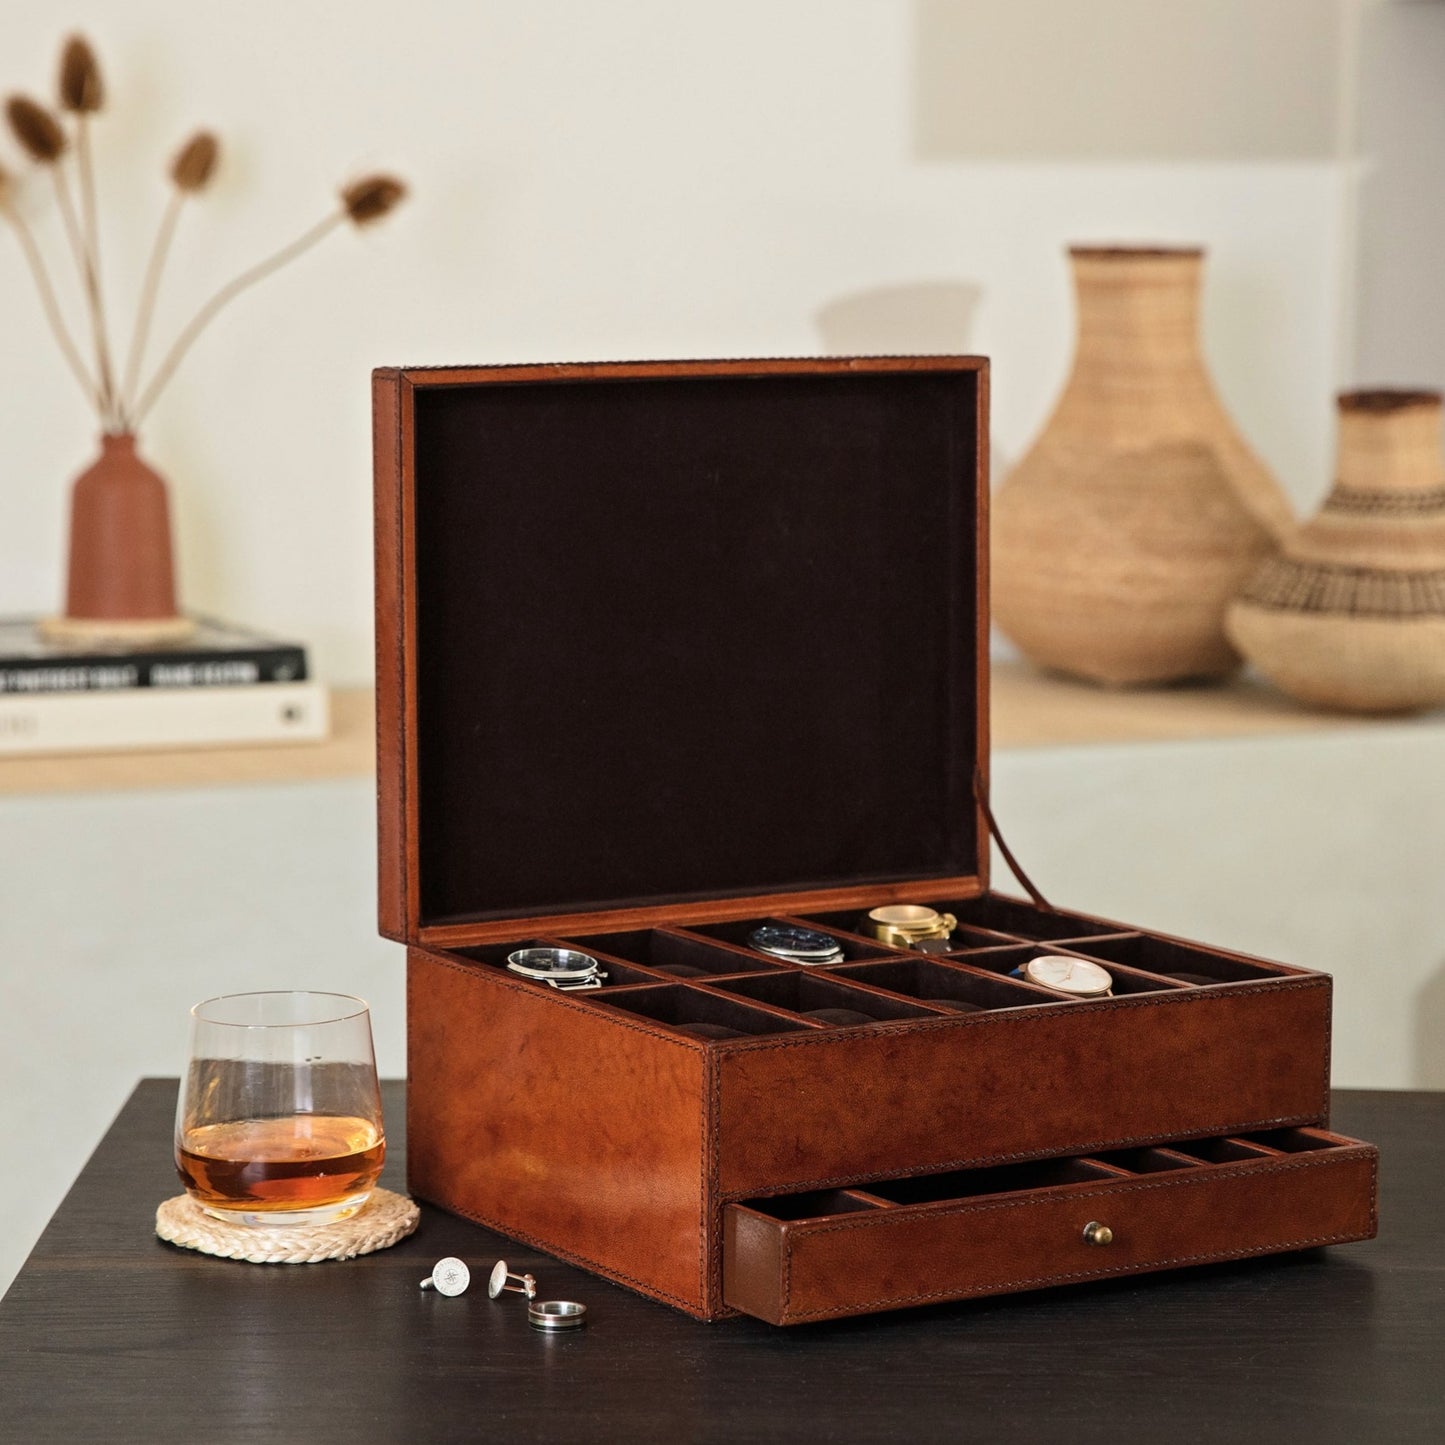 Large rectangular leather watch box with space for ten watches on removeable pillows and a drawer below with suede lined compartments. Personalise as a unique wedding day gift.